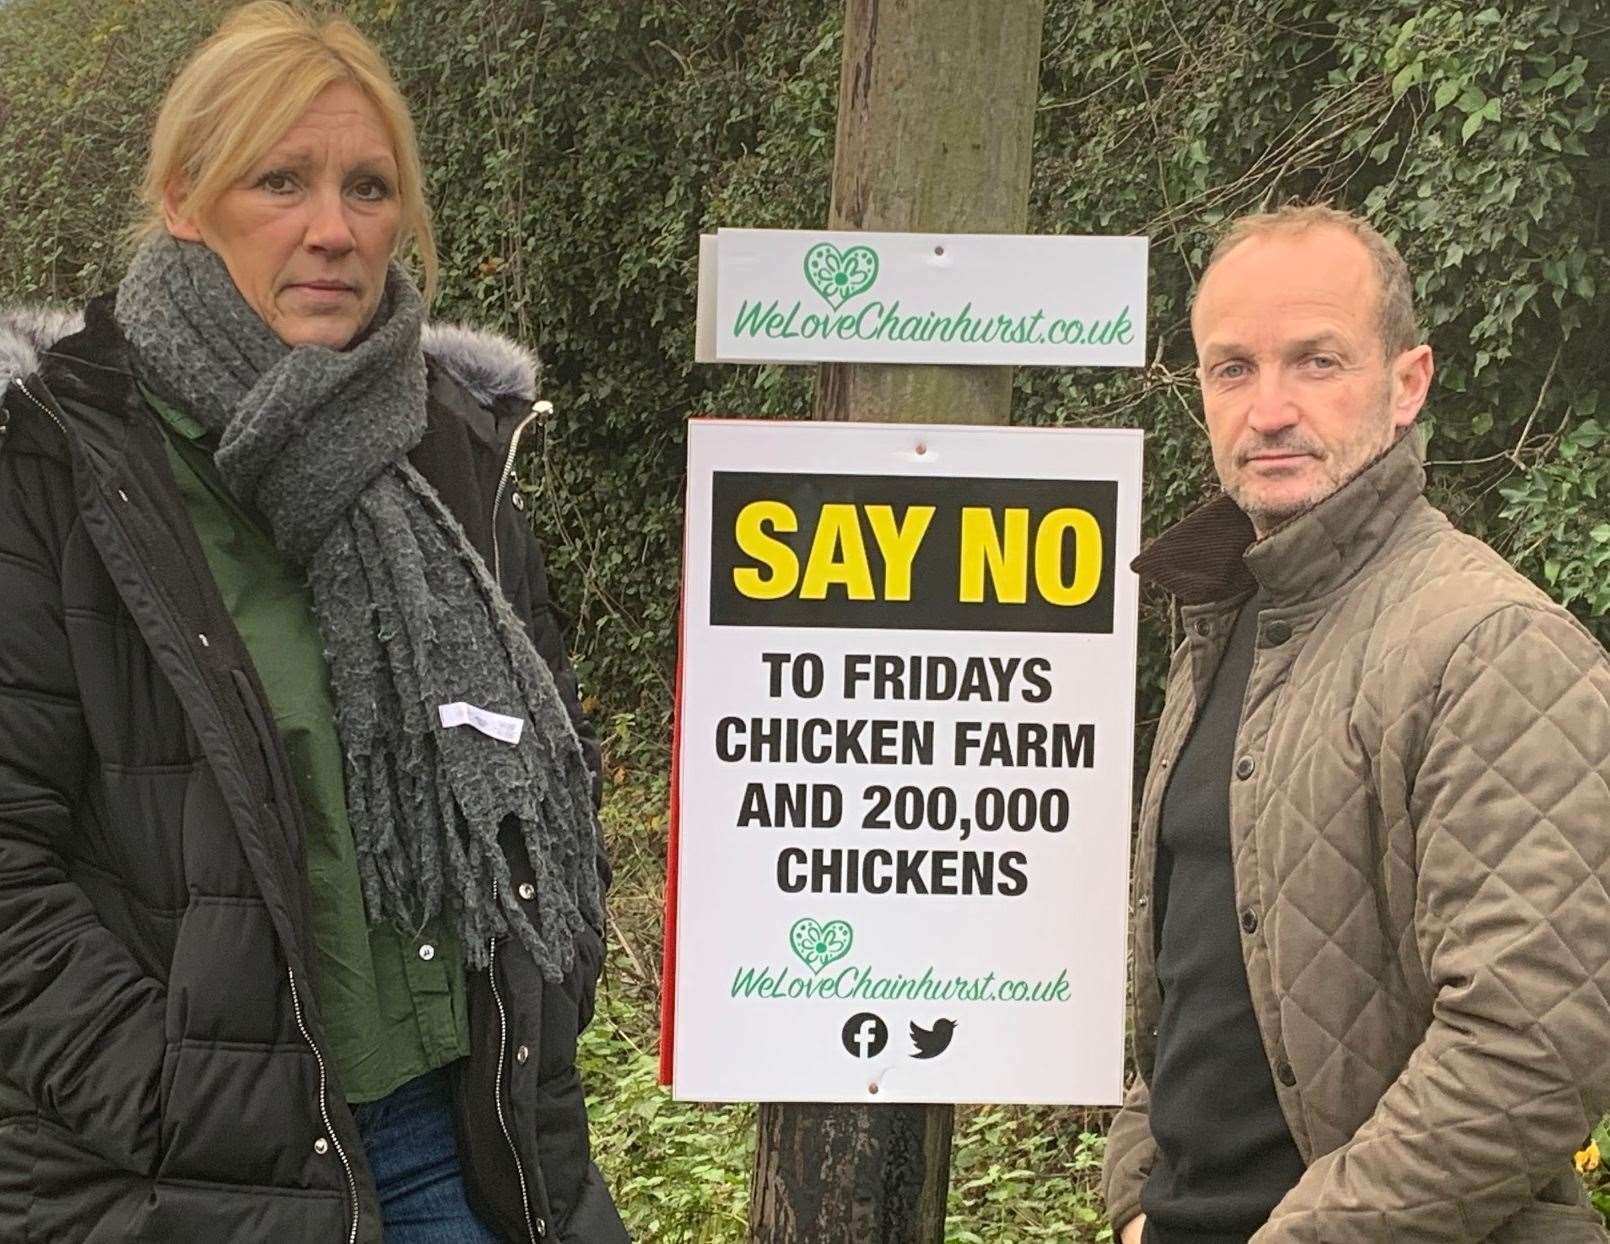 There is local opposition to the plans. Pictured are Adelle and Kevin Back at the site of the proposed chicken Farm in Chainhurst